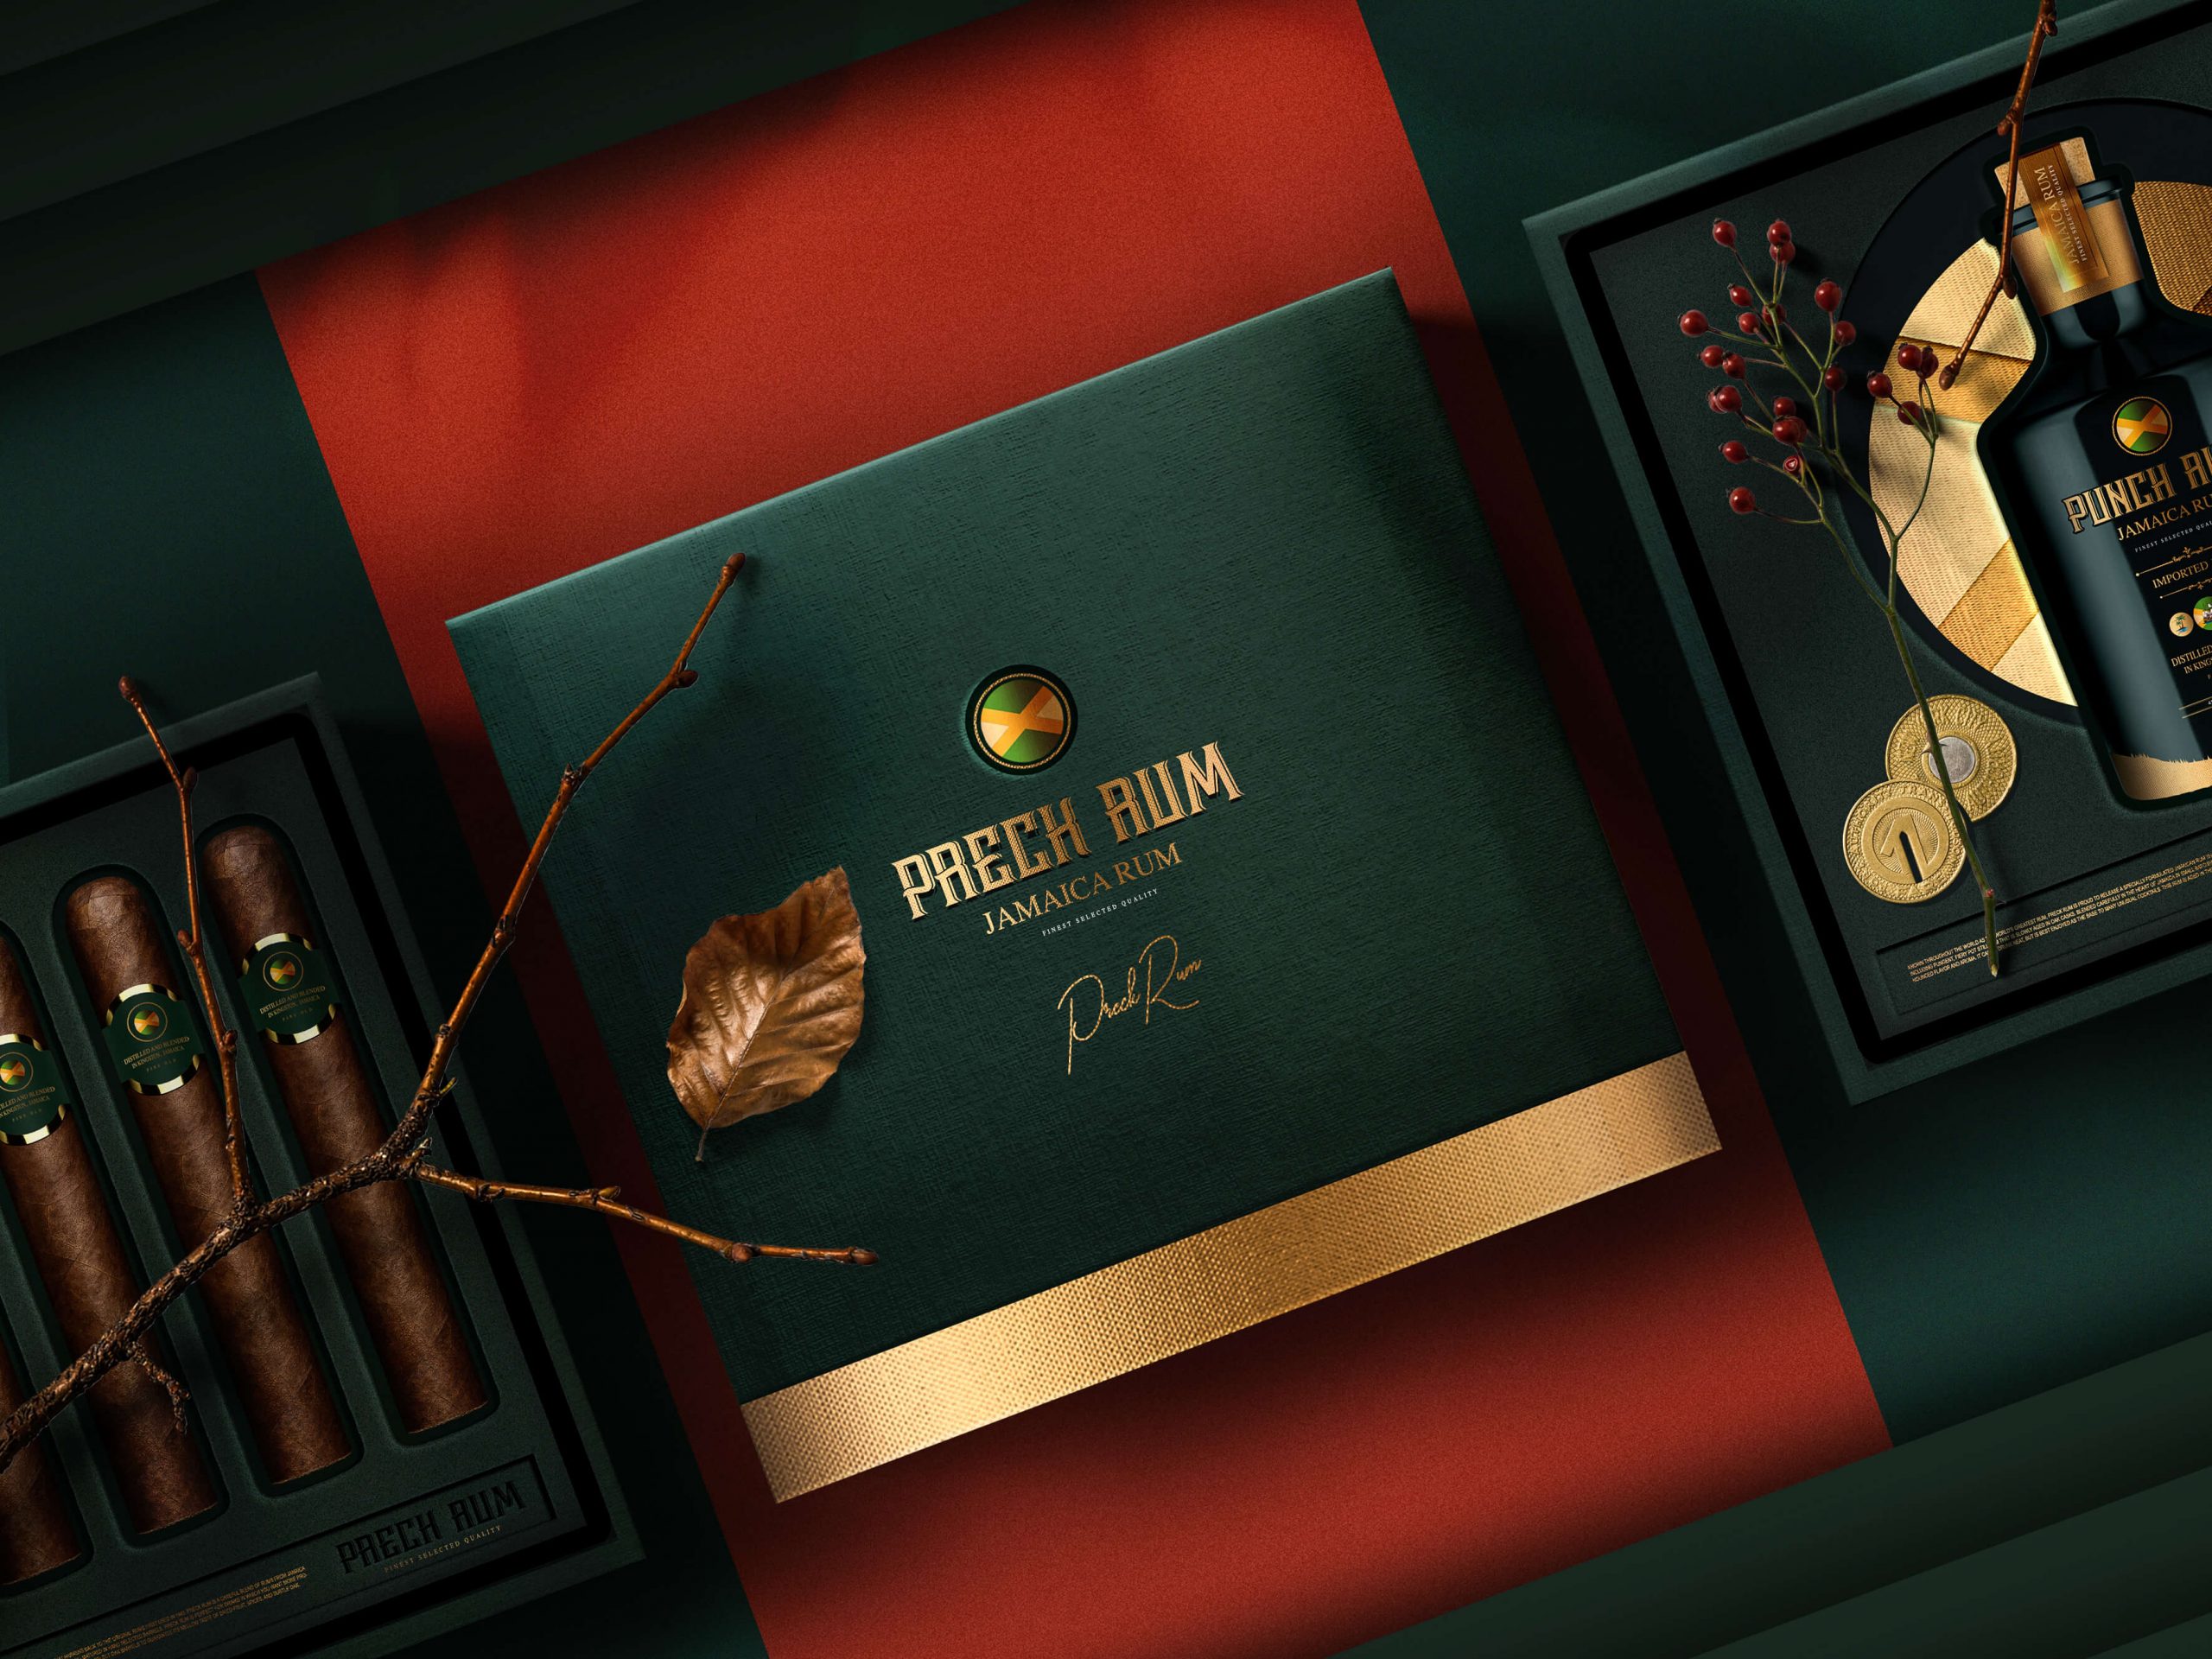 The packaging design for Preach Rum was carefully crafted to reflect the brand's Jamaican roots while also conveying a sense of sophistication and luxury. I chose to use a dark green color scheme combined with gold accents, which not only complement each other nicely but also give the design a regal and timeless feel. As Preach Rum is based in London, it was important to create a design that would appeal to a discerning audience. Additionally, I created two unique gift packages - one featuring only Preach Rum, and another that includes a cigar along with the Preach Rum. Both gift packages showcase the distinctive Preach Rum identity, making them ideal for anyone looking to indulge in a premium spirits experience. Overall, my packaging design for Preach Rum combines elegance and class to create a standout product that's sure to leave a lasting impression.